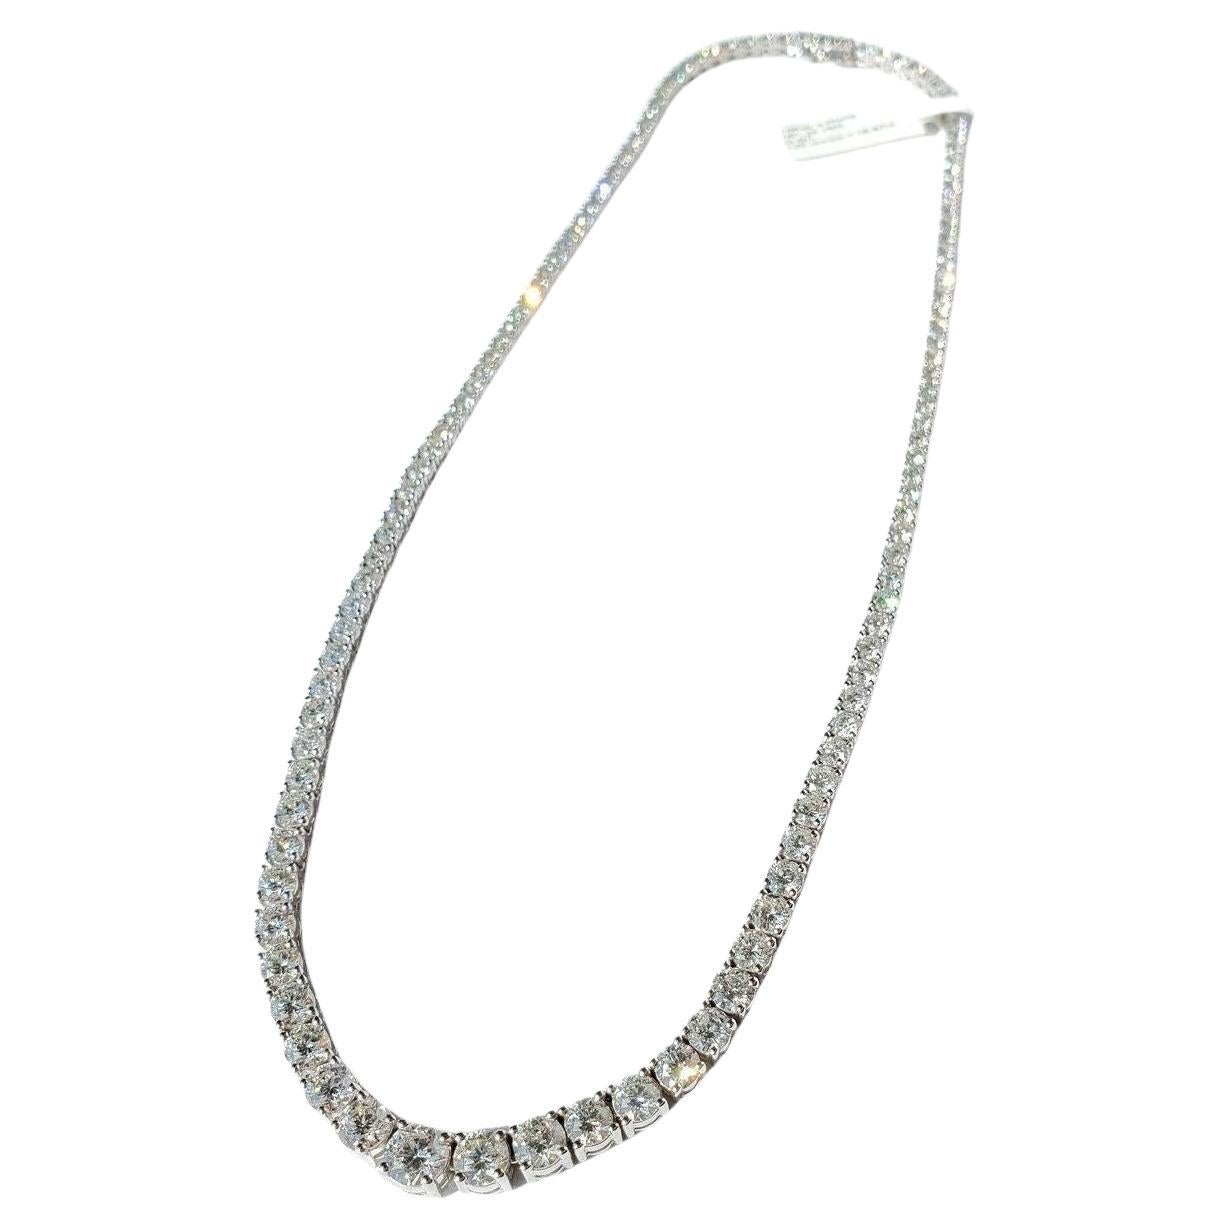 An exquisite Riviera Necklace
oval diamonds 
g color
vs2 si1 eye clean